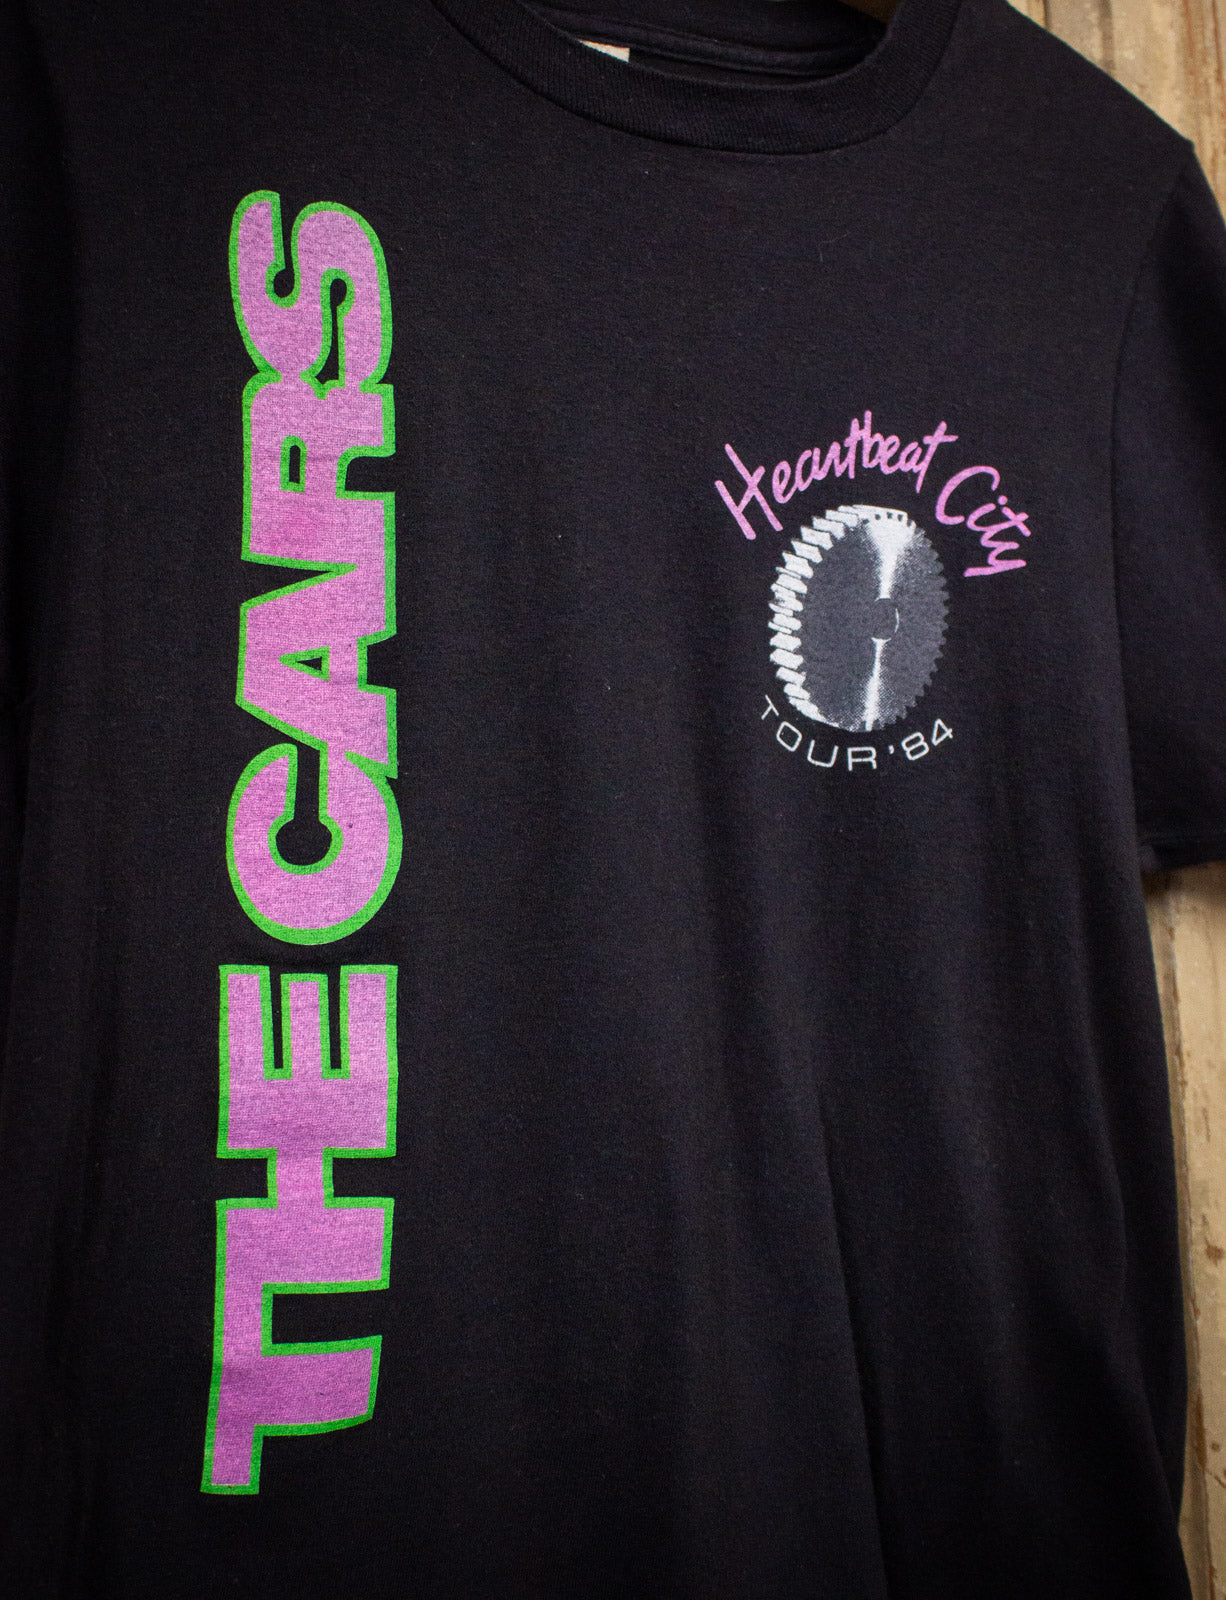 Vintage The Cars Heartbeat City Concert T Shirt 1984 Black Small